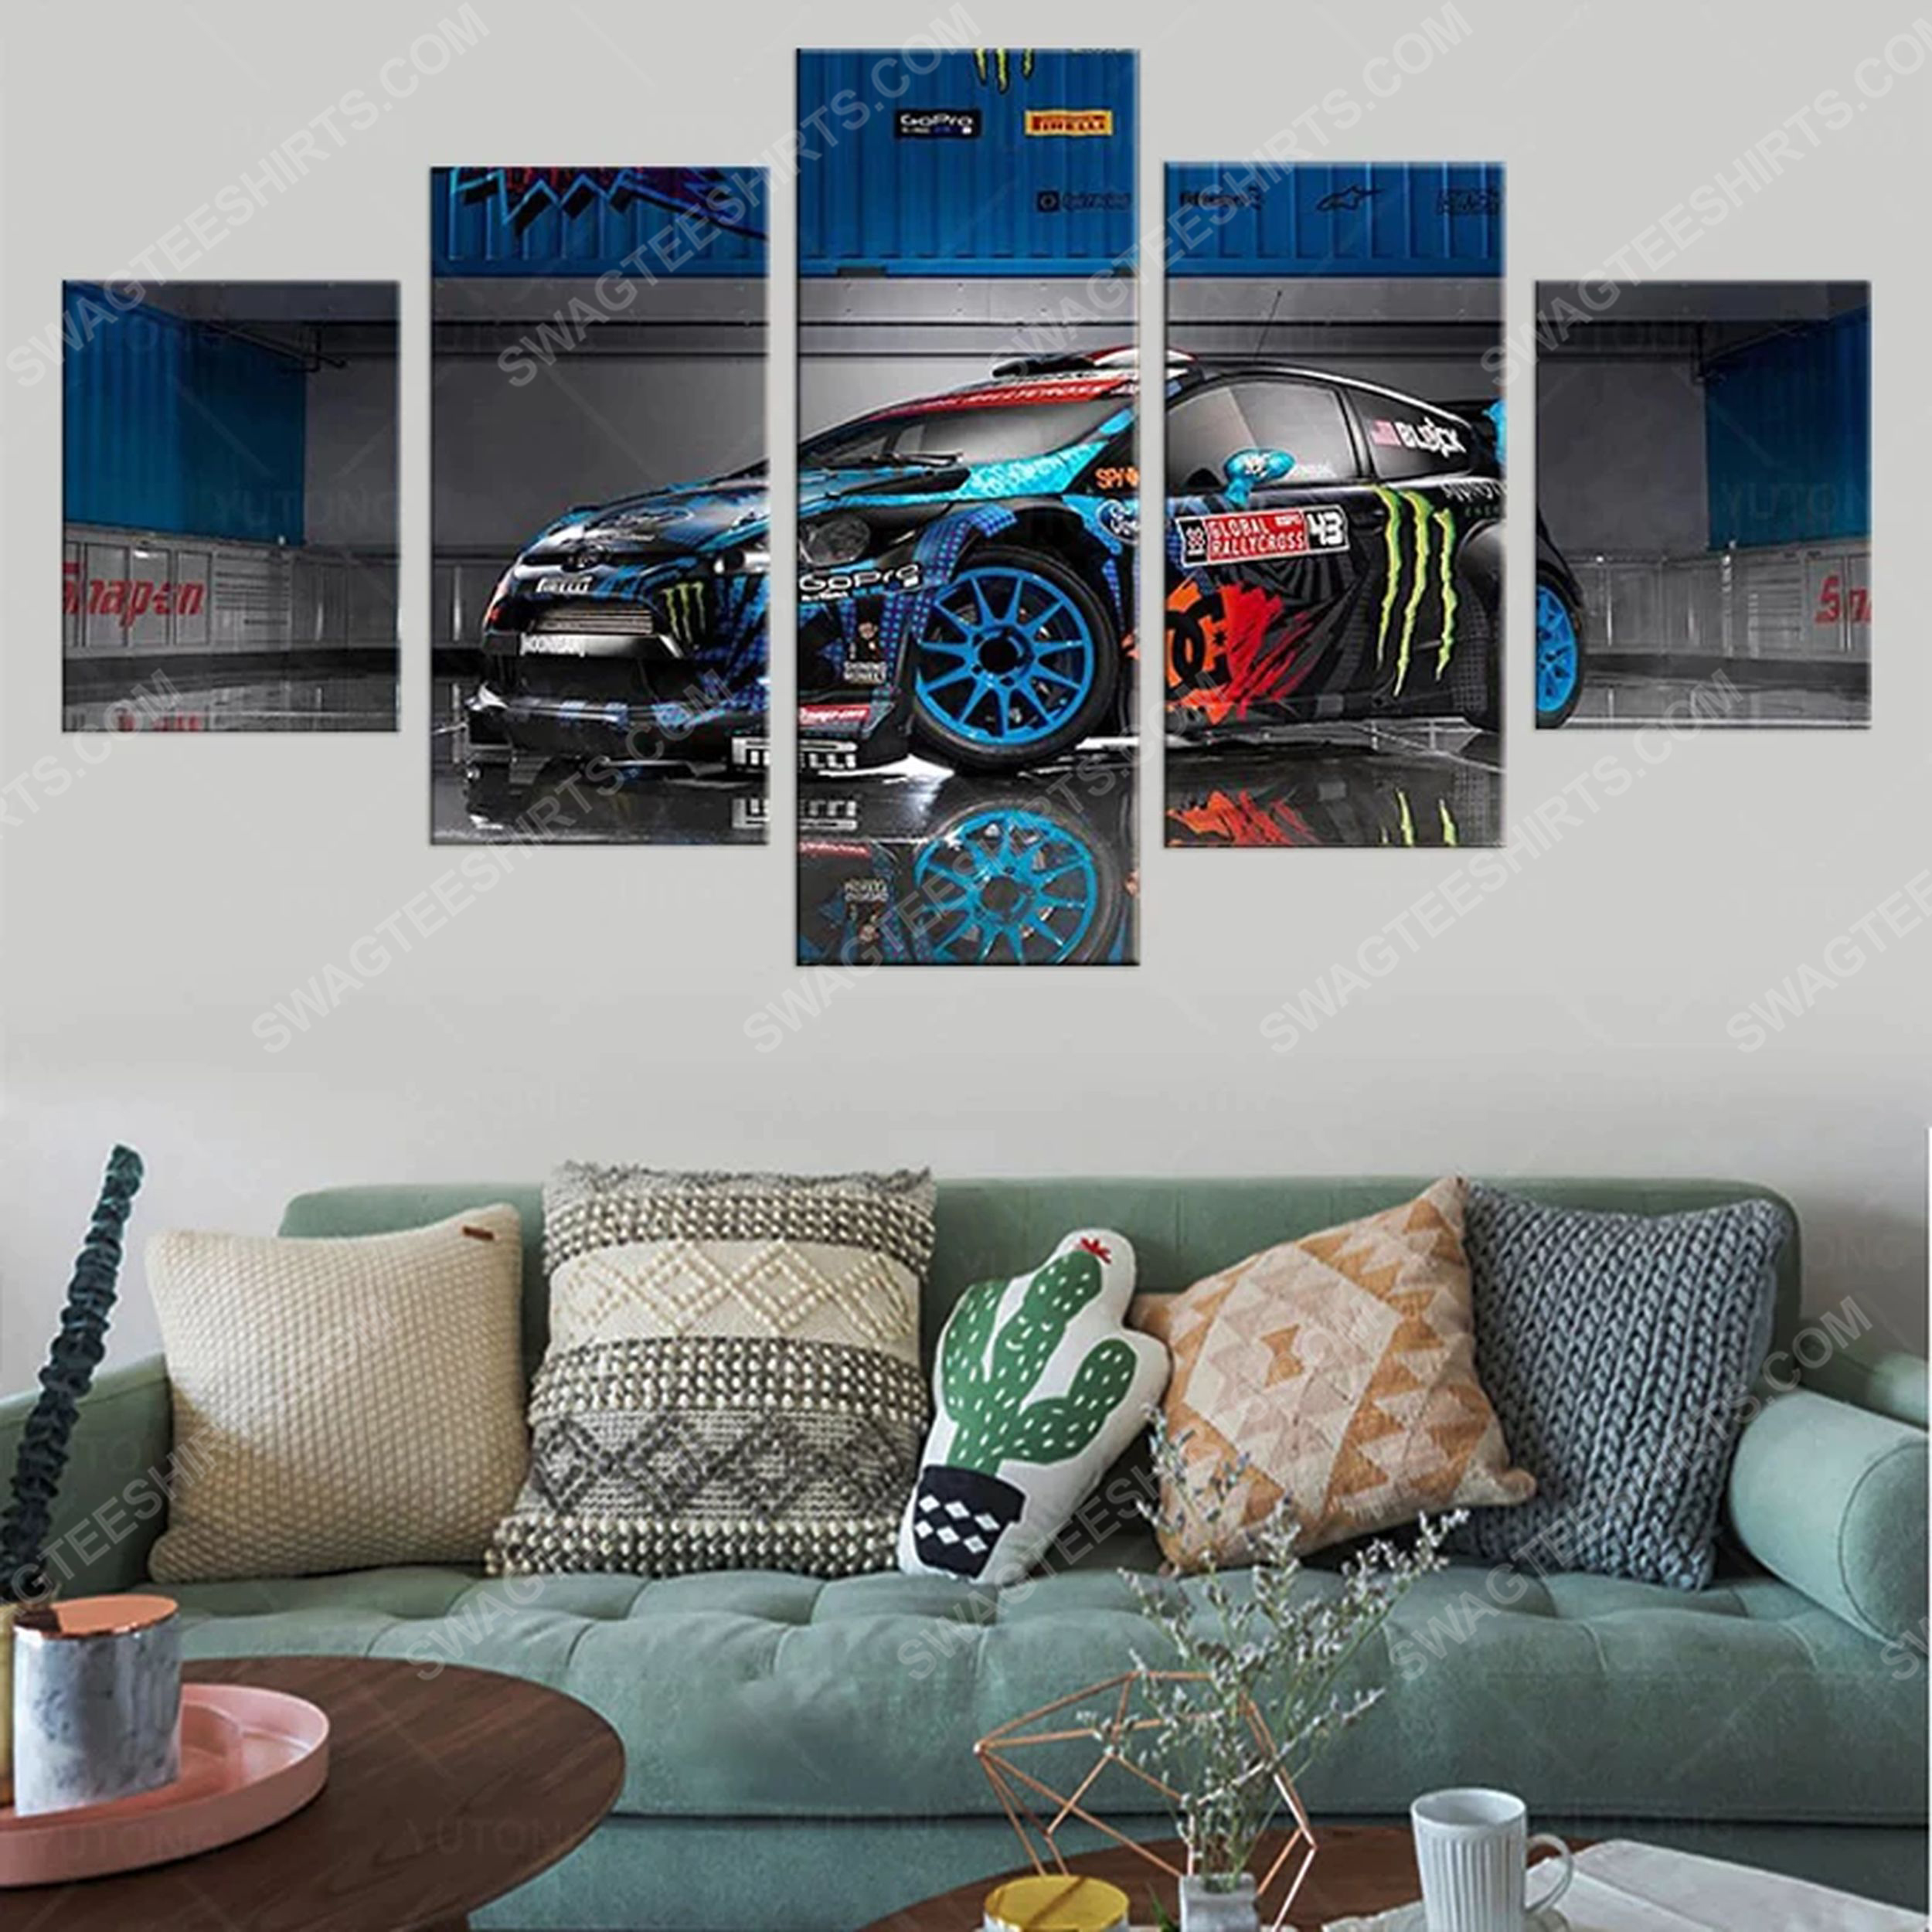 [special edition] Hoonigan racing division print painting canvas wall art home decor – maria